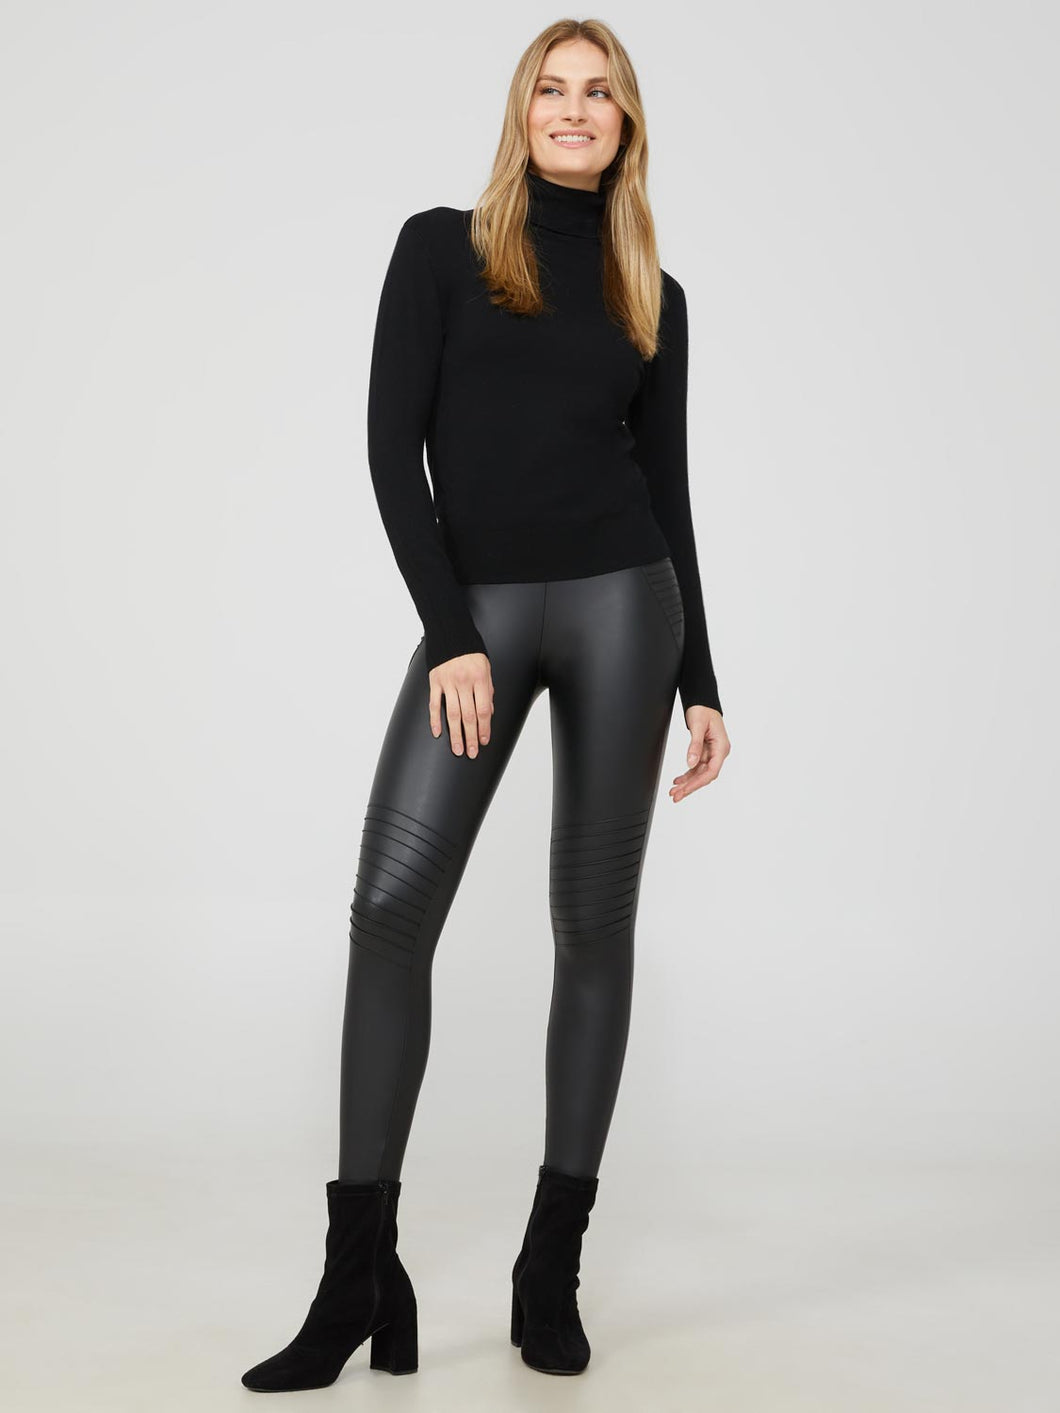 Into The Night Faux Leather Moto Leggings